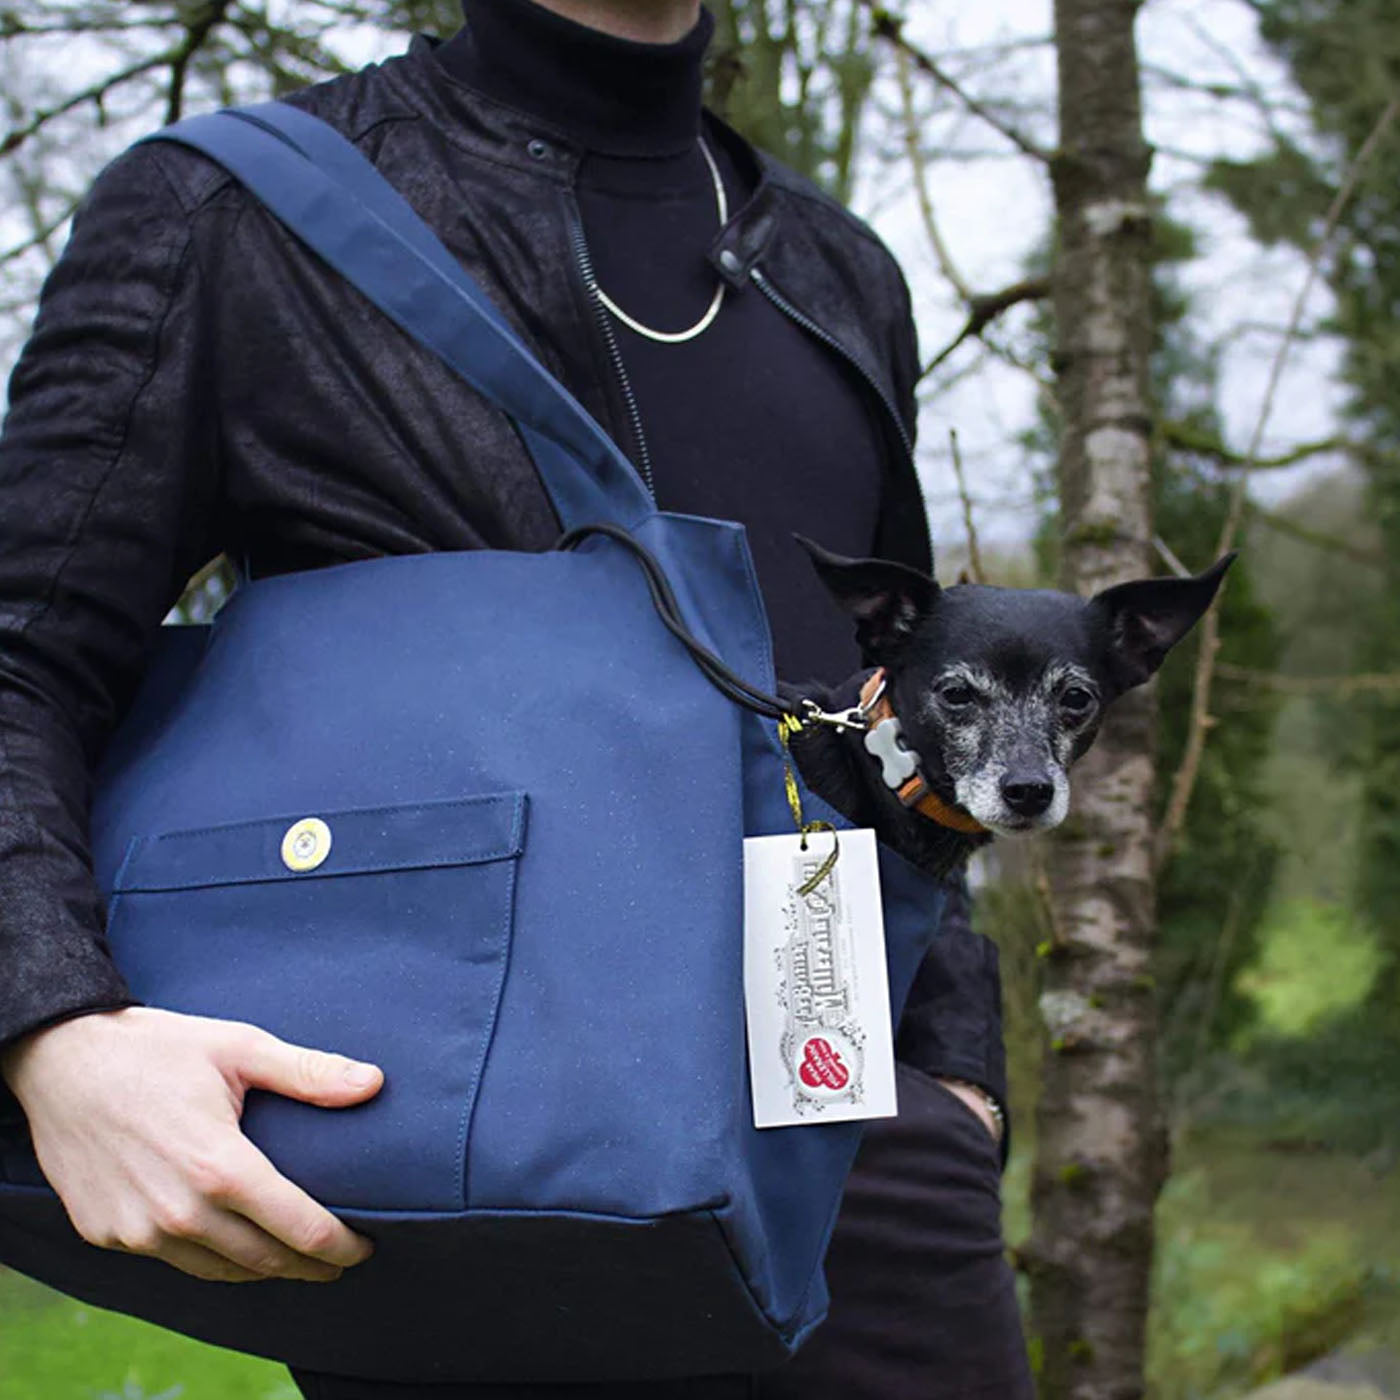 Waxed Cotton Rainy Poms Carrier Navy by SohoPoms